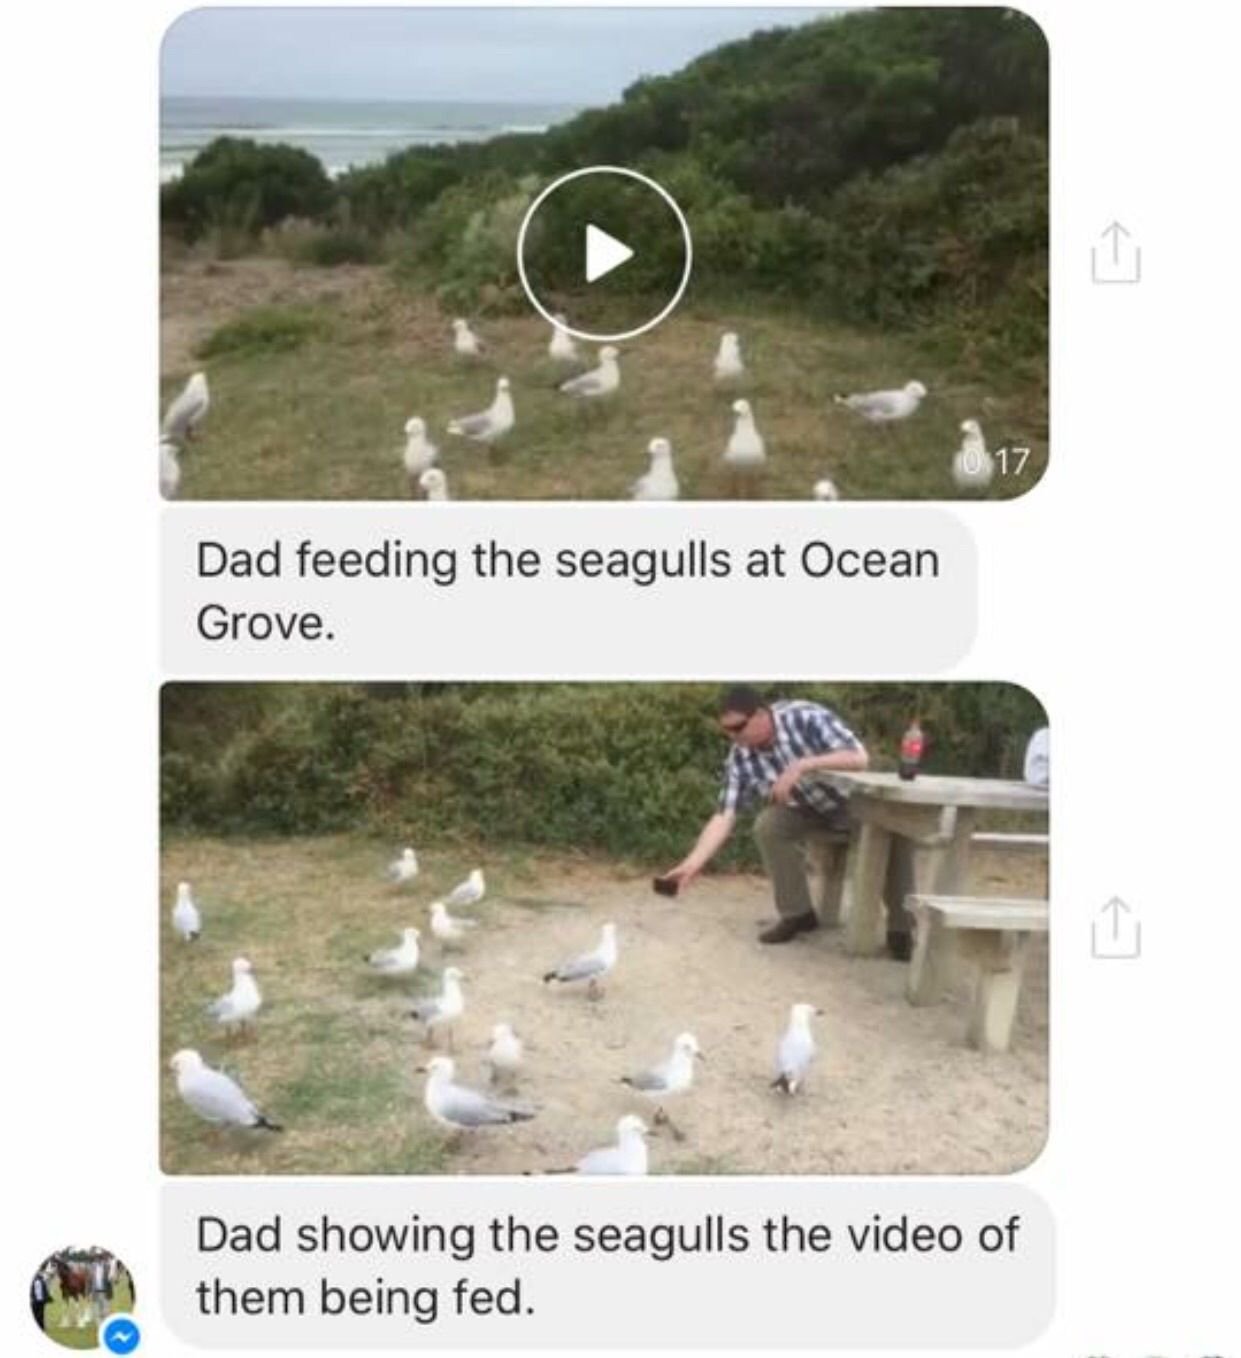 seagulls tumblr posts - 10.17 Dad feeding the seagulls at Ocean Grove. Dad showing the seagulls the video of them being fed.